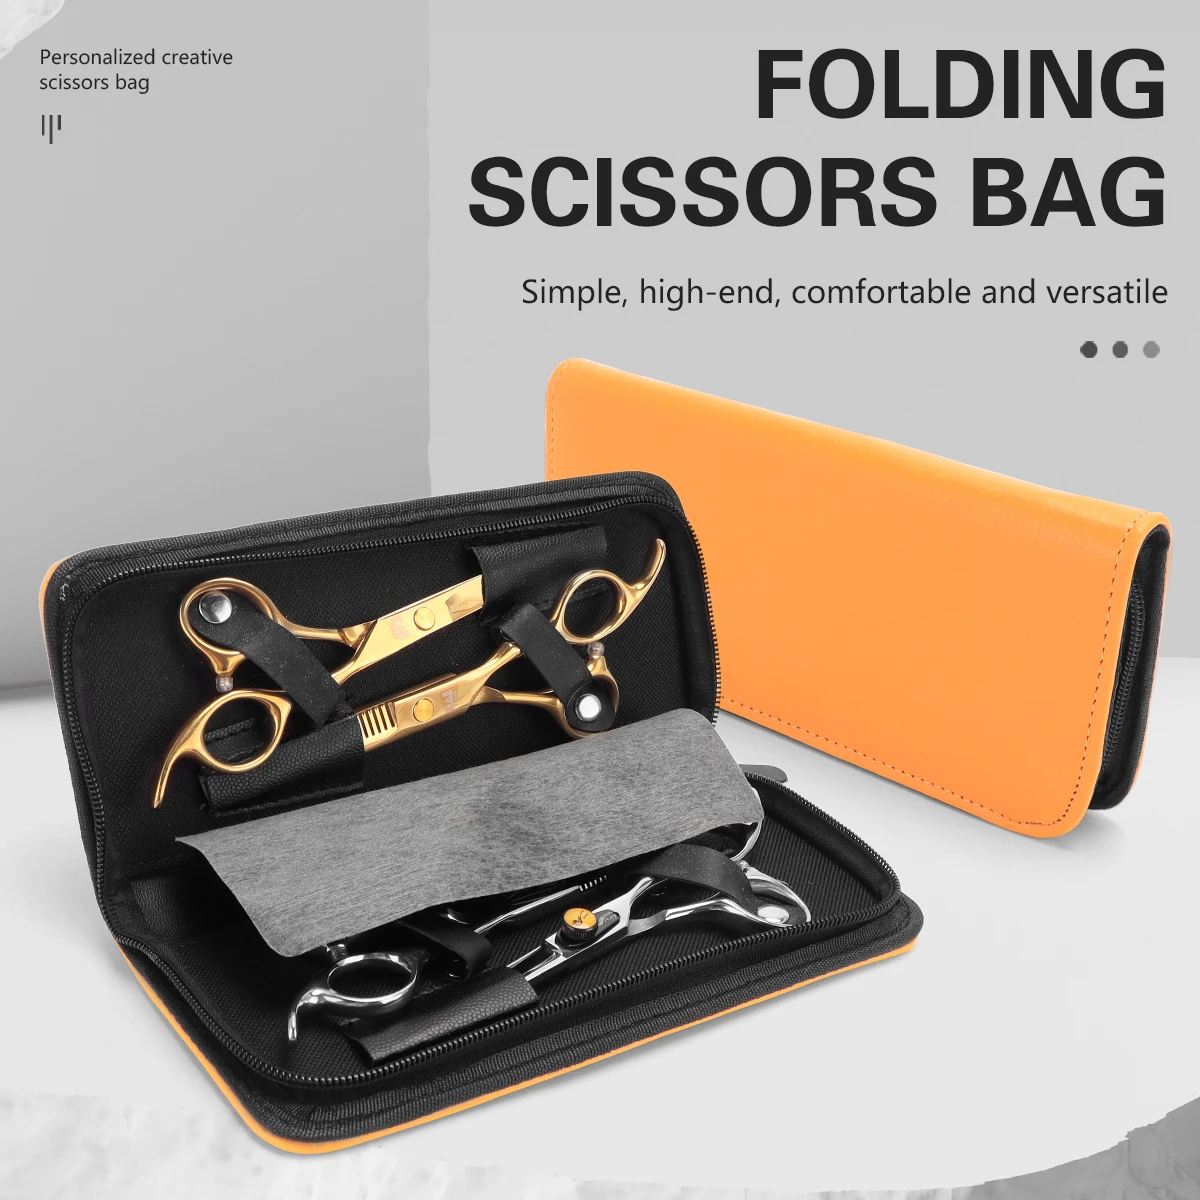 Haircut Scissors Bag Pu Leather Zipper Pouch Salon Portable Hairdressing Scissors Shears Storage Bag Barber Tools fromthenon custom note taking system discbound notebook storage pouch h planner mushroom hole zipper bag office stationery